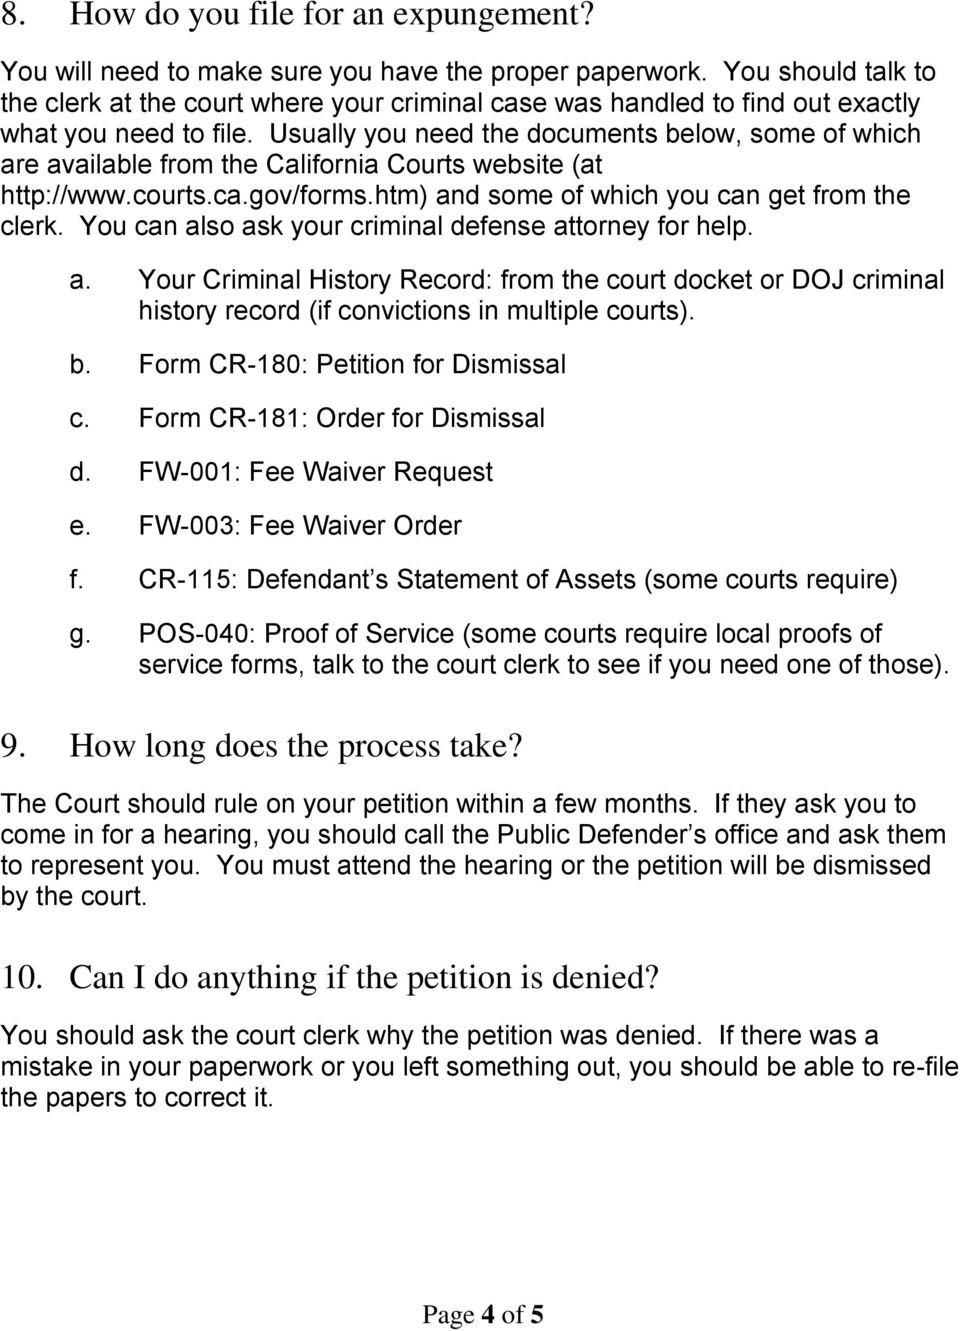 Usually you need the documents below, some of which are available from the California Courts website (at http://www.courts.ca.gov/forms.htm) and some of which you can get from the clerk.